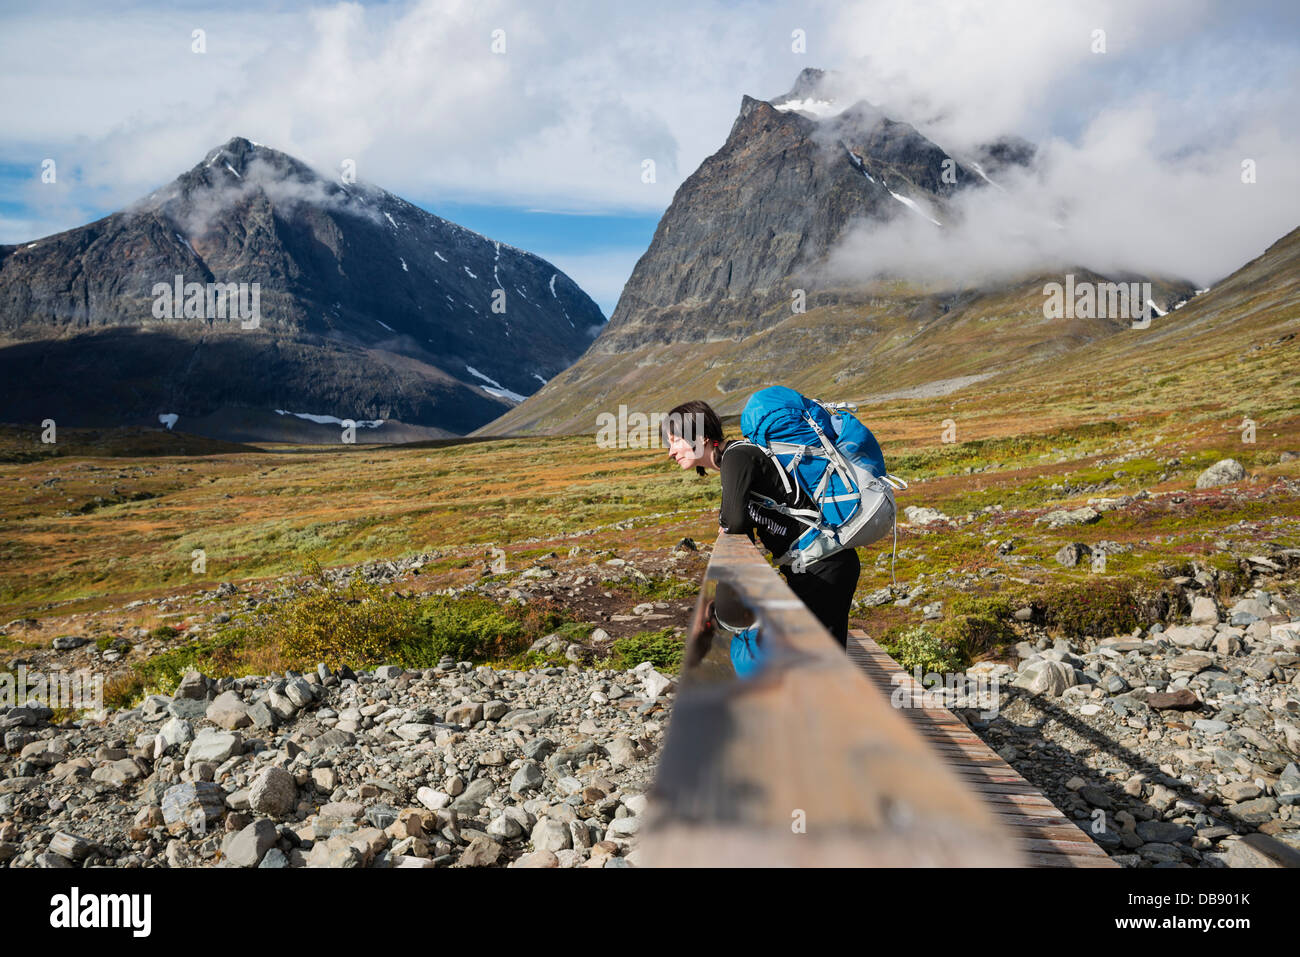 Female hiker leans on bridge in Ladtjovagge with Tolpagorni - Duolbagorni mountain in distance, Lappland, Sweden Stock Photo